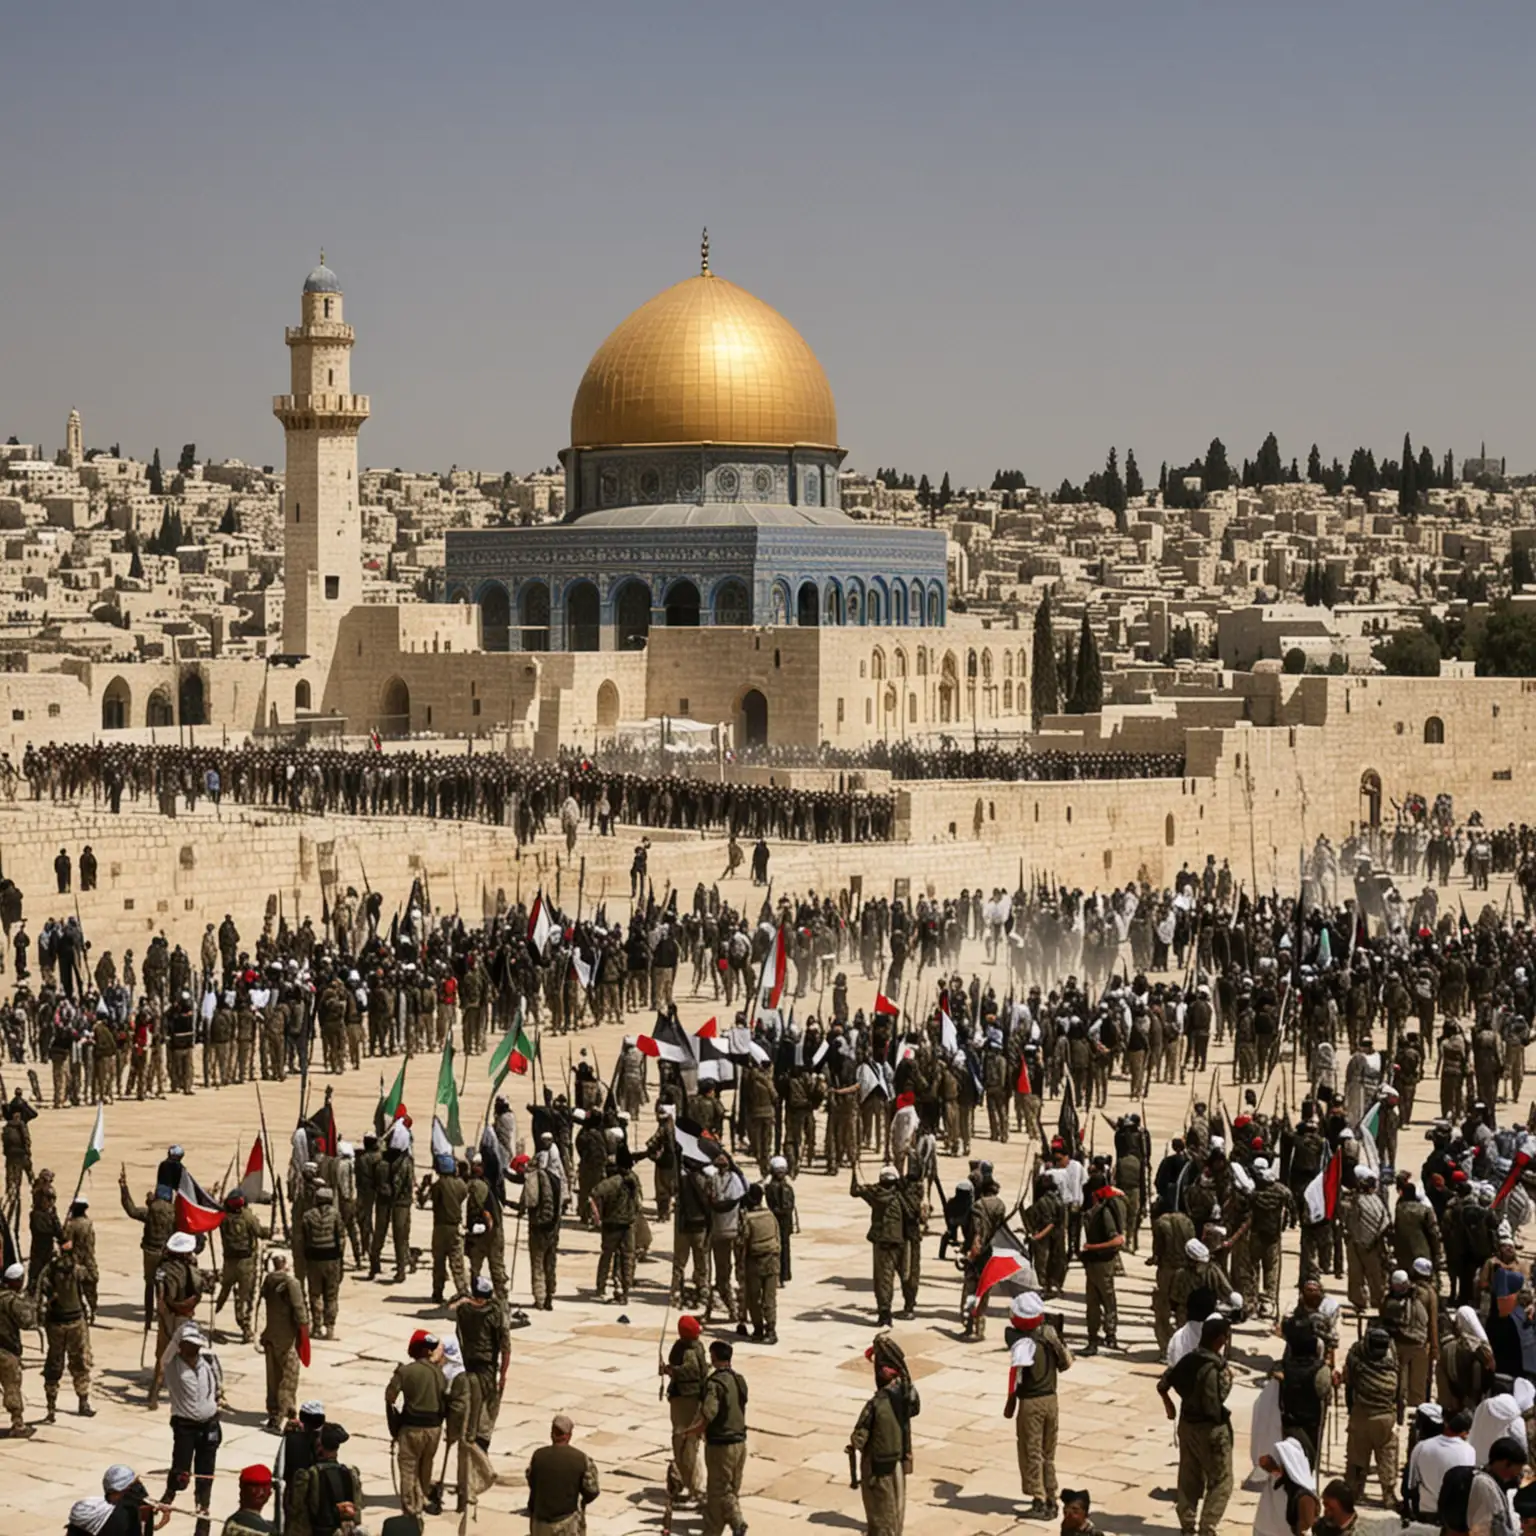 Multinational-Arab-and-Islamic-Army-Confronts-Israeli-Forces-at-Al-Aqsa-Mosque